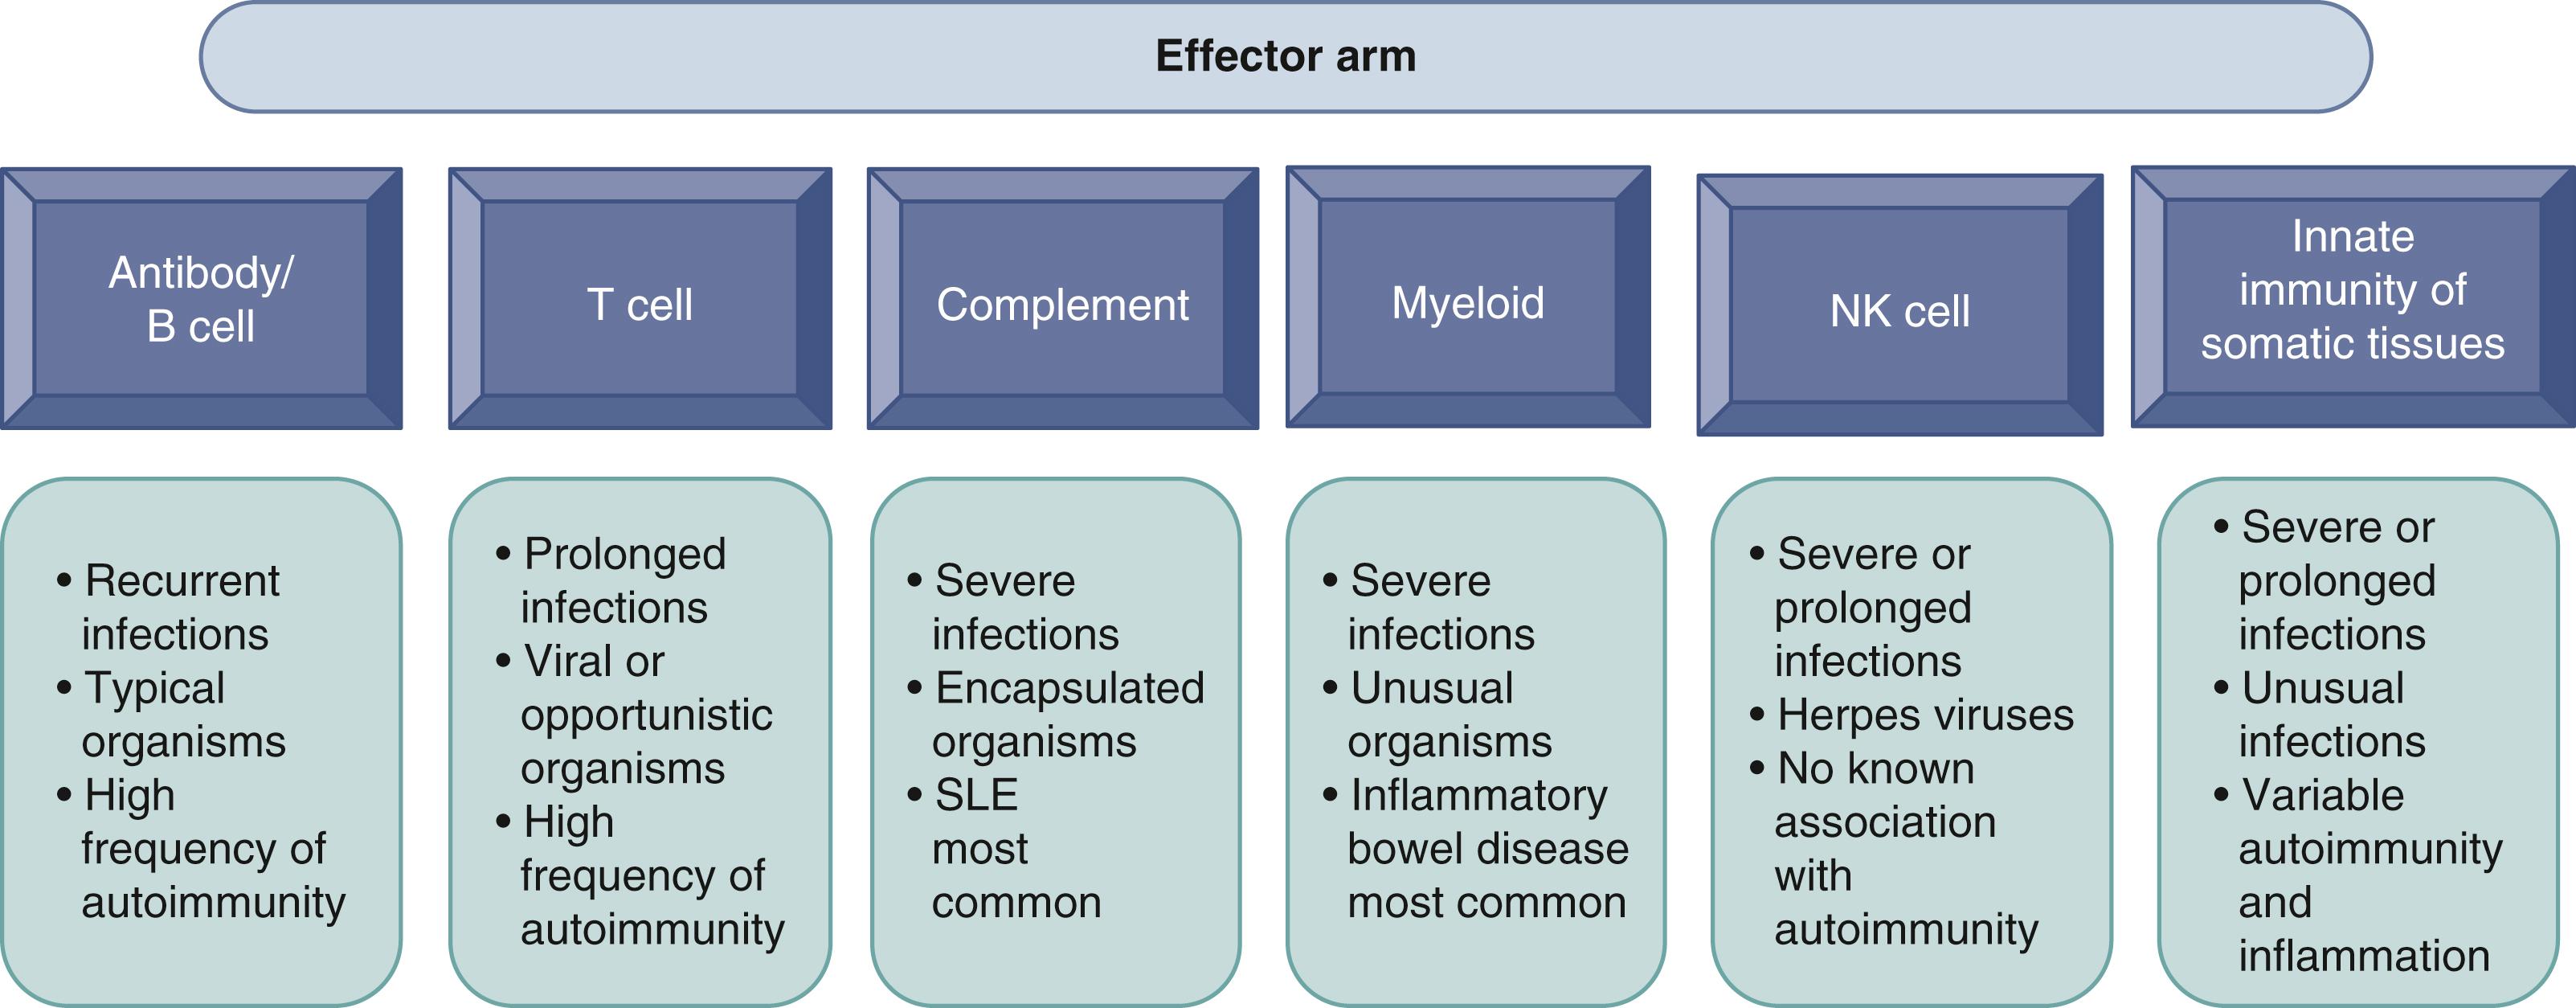 Fig. 43.2, The most common types of infections and autoimmune conditions are shown schematically.